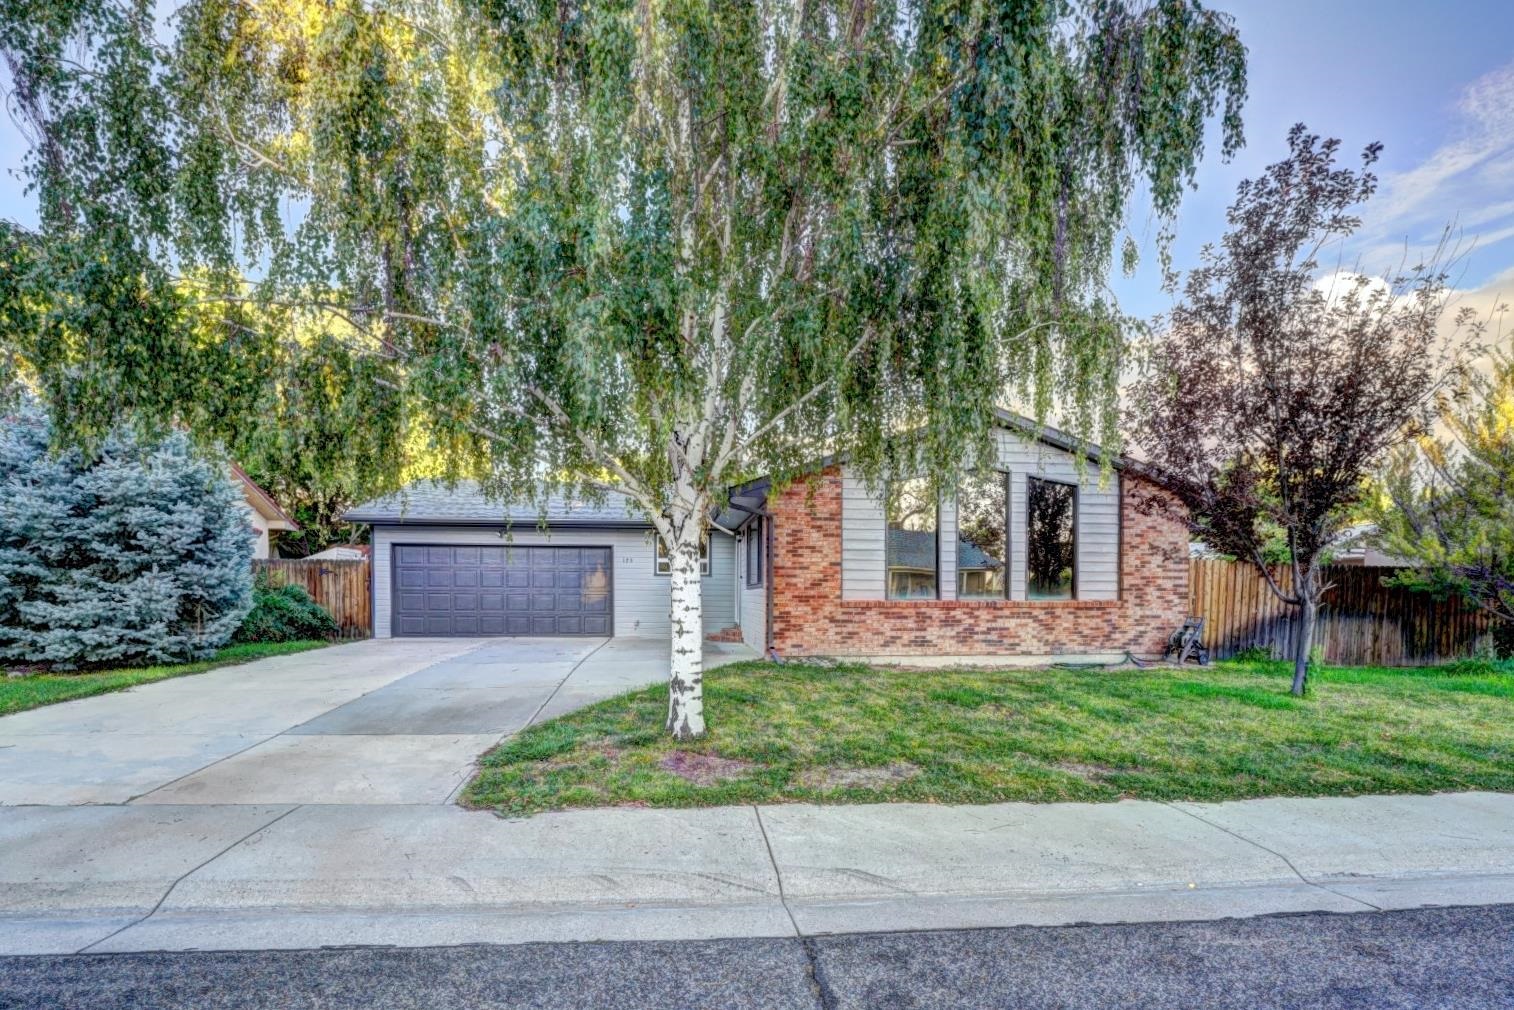 Looking for the perfect home in the perfect location? Look no further! Beautifully remodeled in 2020, including floors, quartz countertops, bathrooms, roof and so much more. In downtown Palisade near wineries, restaurants, bars, hiking and the river. Mature trees, landscaping and garden area. Sit back and enjoy the views of the book cliffs and Mt Garfield! Come set up a private showing in this desired quiet neighborhood! Irrigation runs with the land and is included with the yearly taxes.